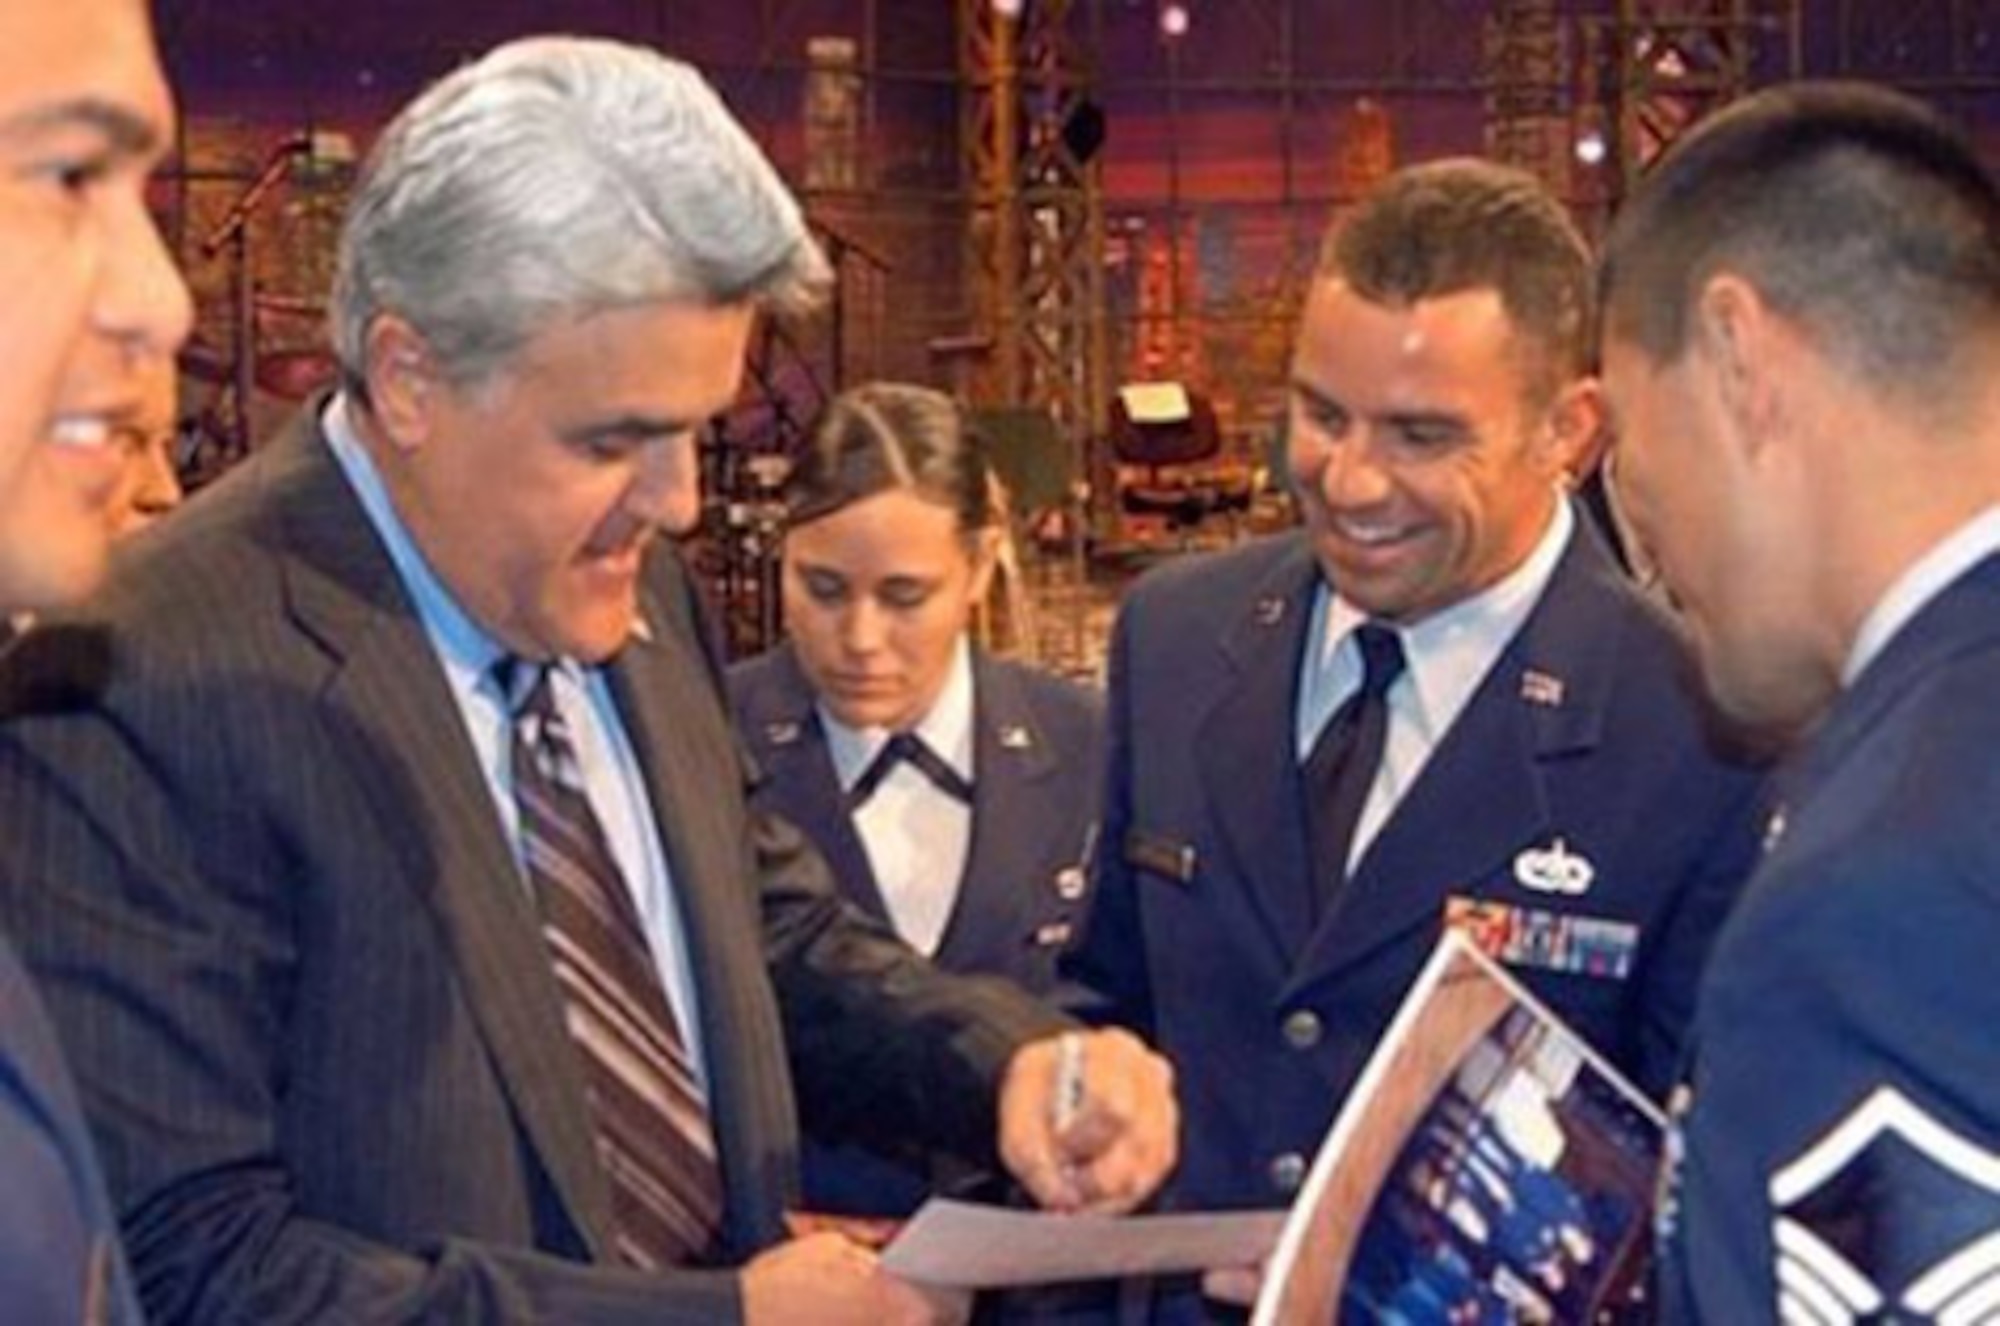 BURBANK, Calif. (AFMCNS) - Jay Leno, host of "The Tonight Show," autographs a photo for Master Sgt. Michael Hordichok, 31st Test and Evaluation Squadron program manager, at NBC Studios in Burbank, Calif., on Nov. 22. Mr. Leno invited more than 350 servicemembers, including 55 Airmen from Edwards, to be the audience for the taping of his Thanksgiving Day episode. (Air Force photo)